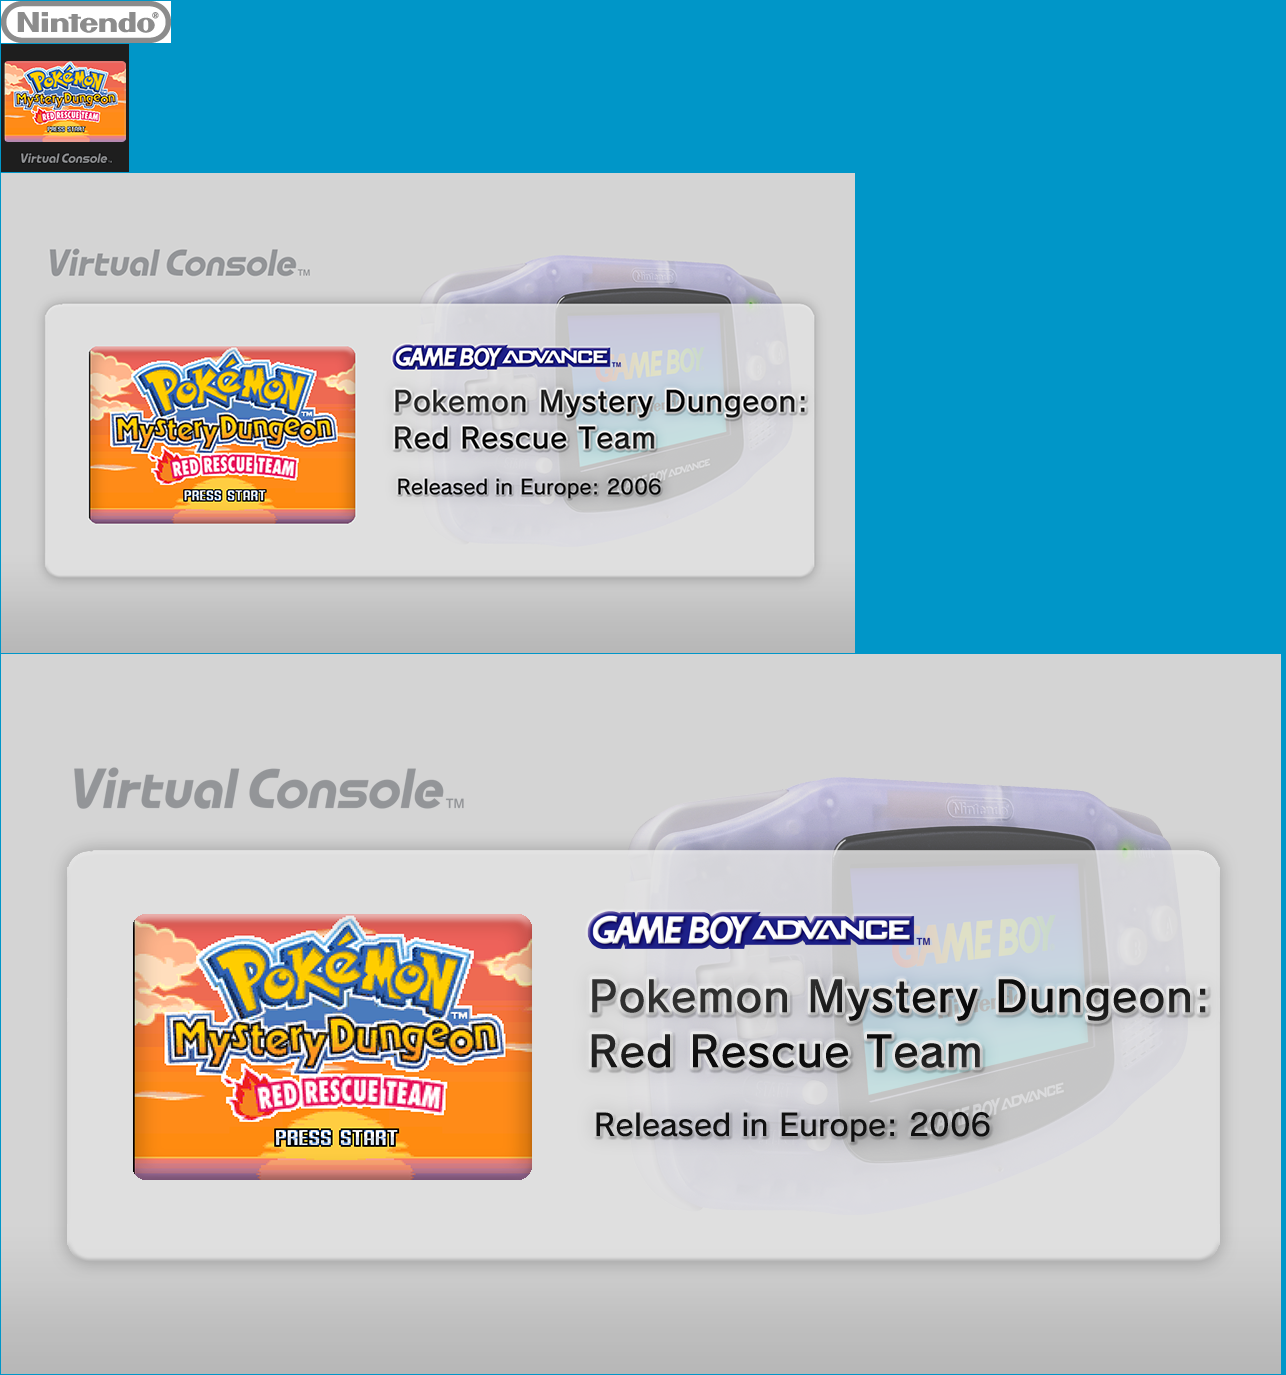 Virtual Console - Pokémon Mystery Dungeon: Red Rescue Team